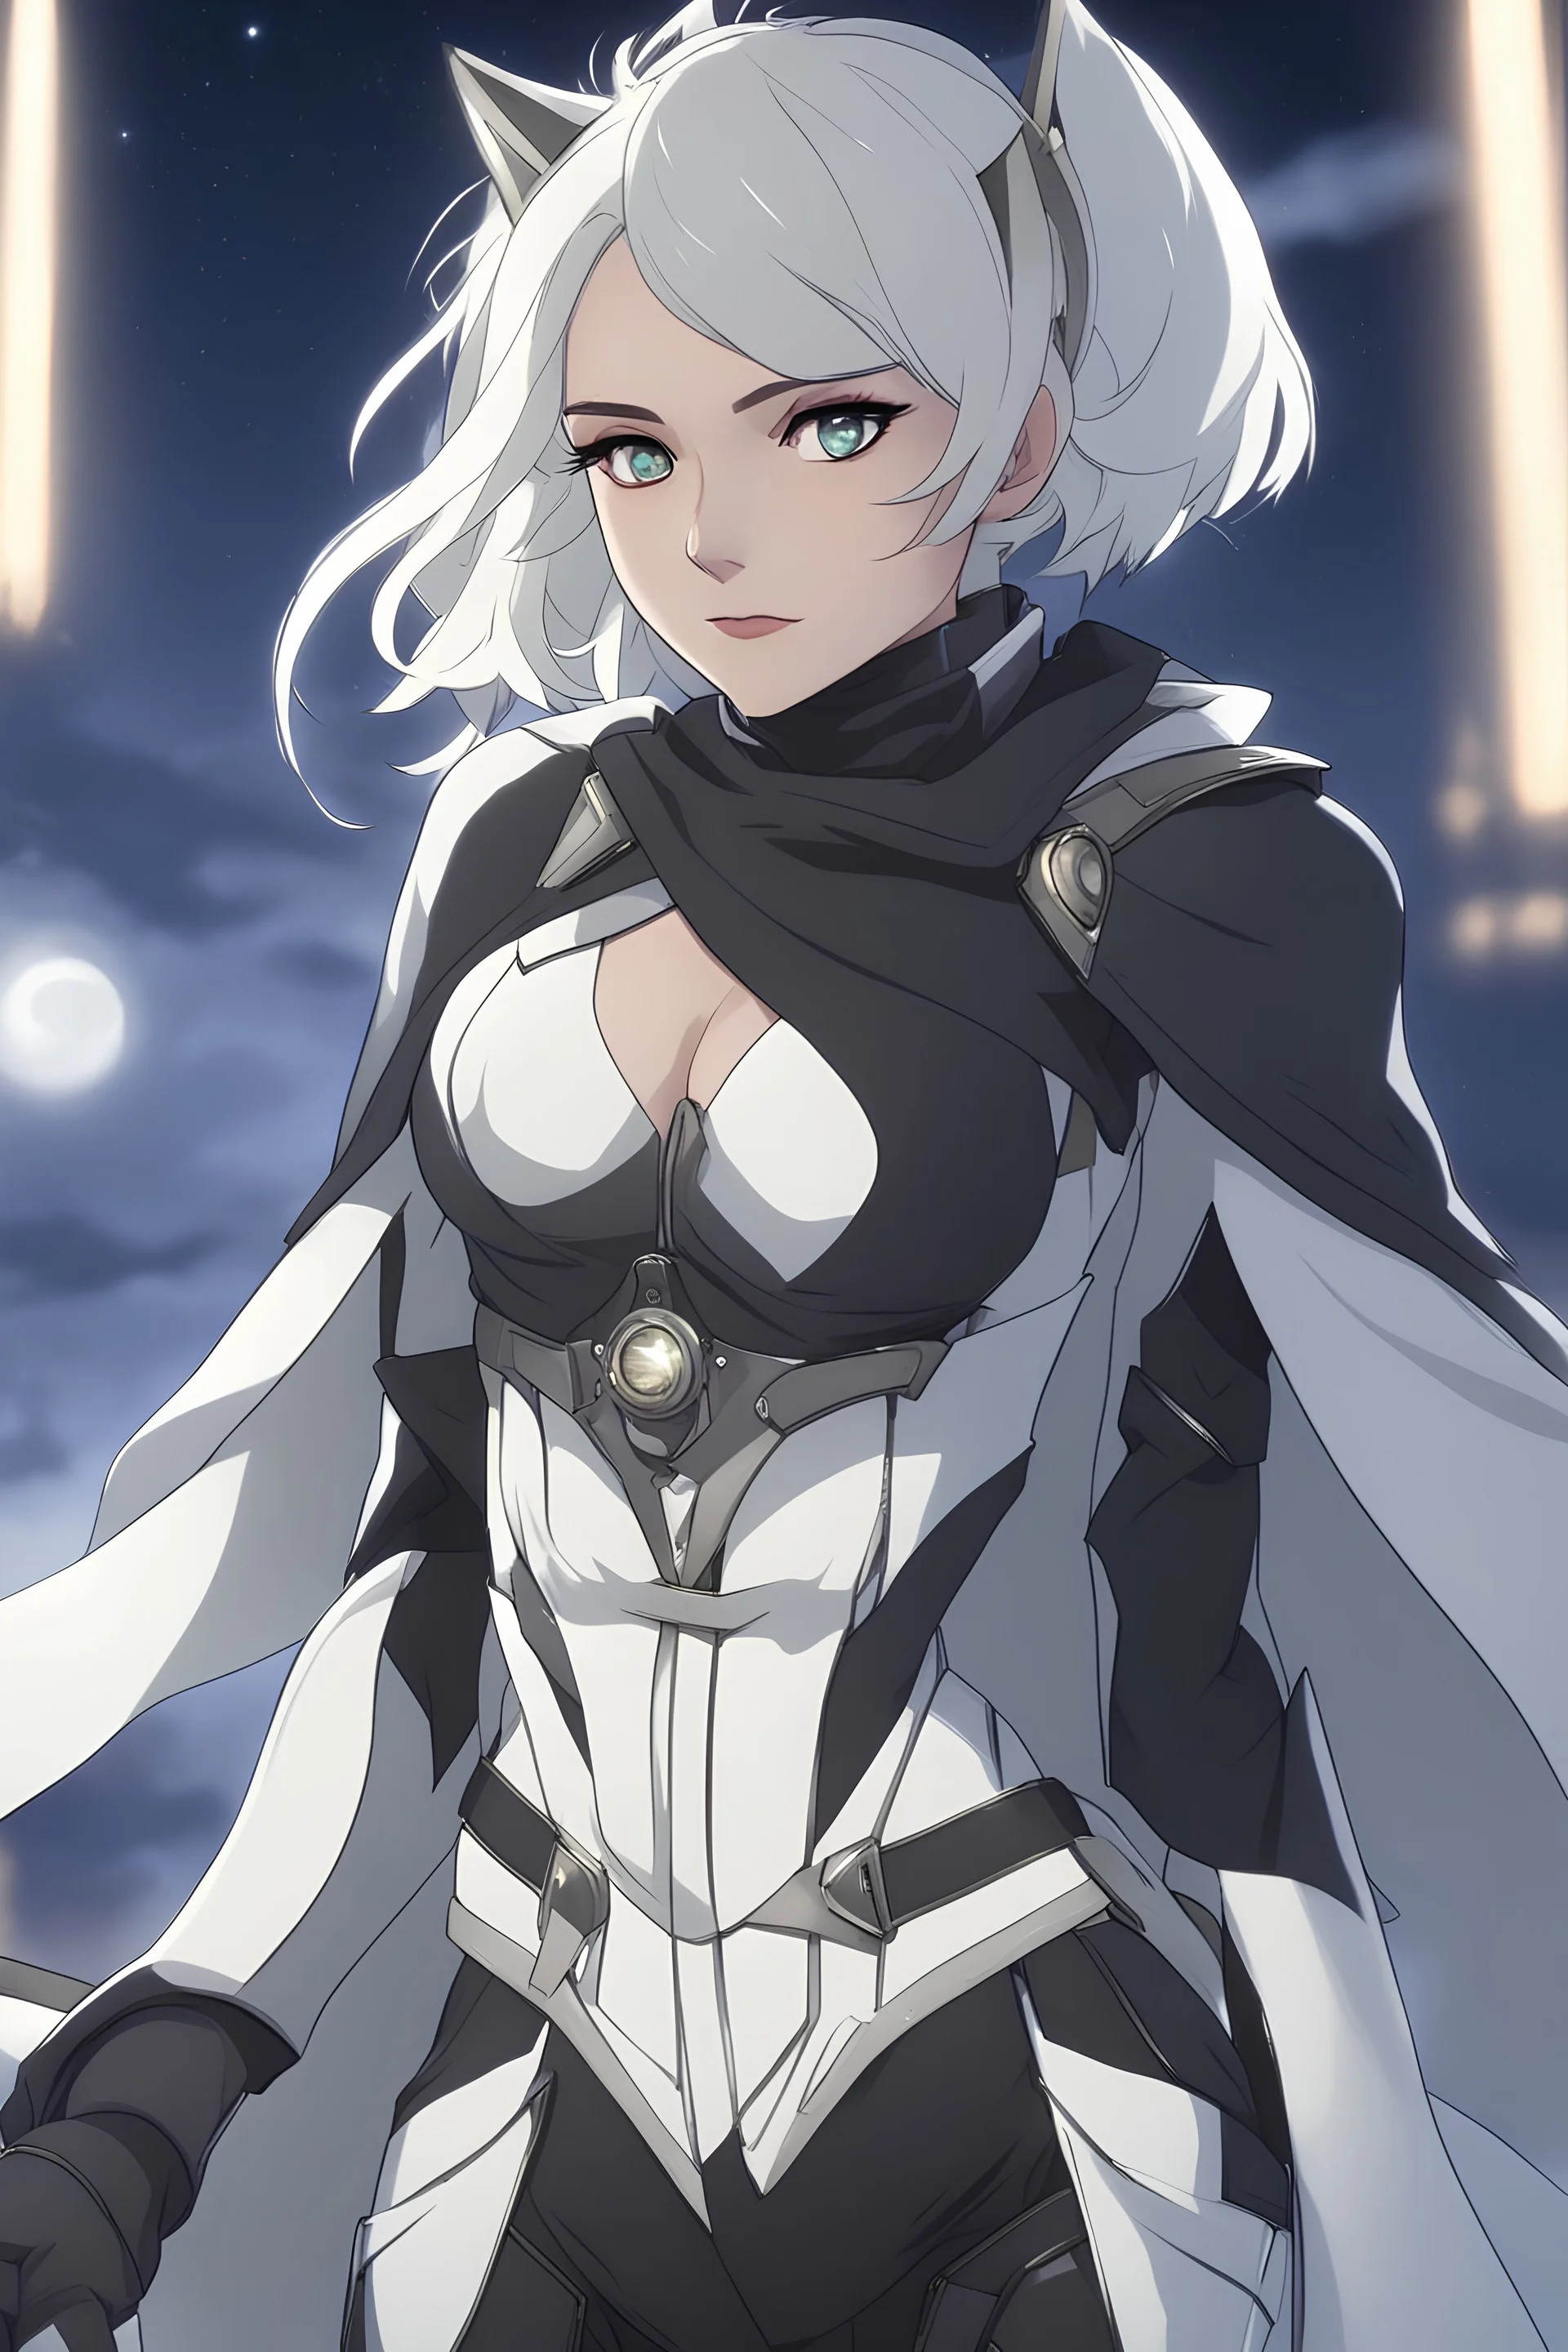 Pale Woman with short white hair, grey eyes, scar over eye, silver and white futuristic corset, wearing a skirt and thigh boots, white cloak, lynx ears, wielding a scimitar, smirking, smug, night sky background, RWBY animation style